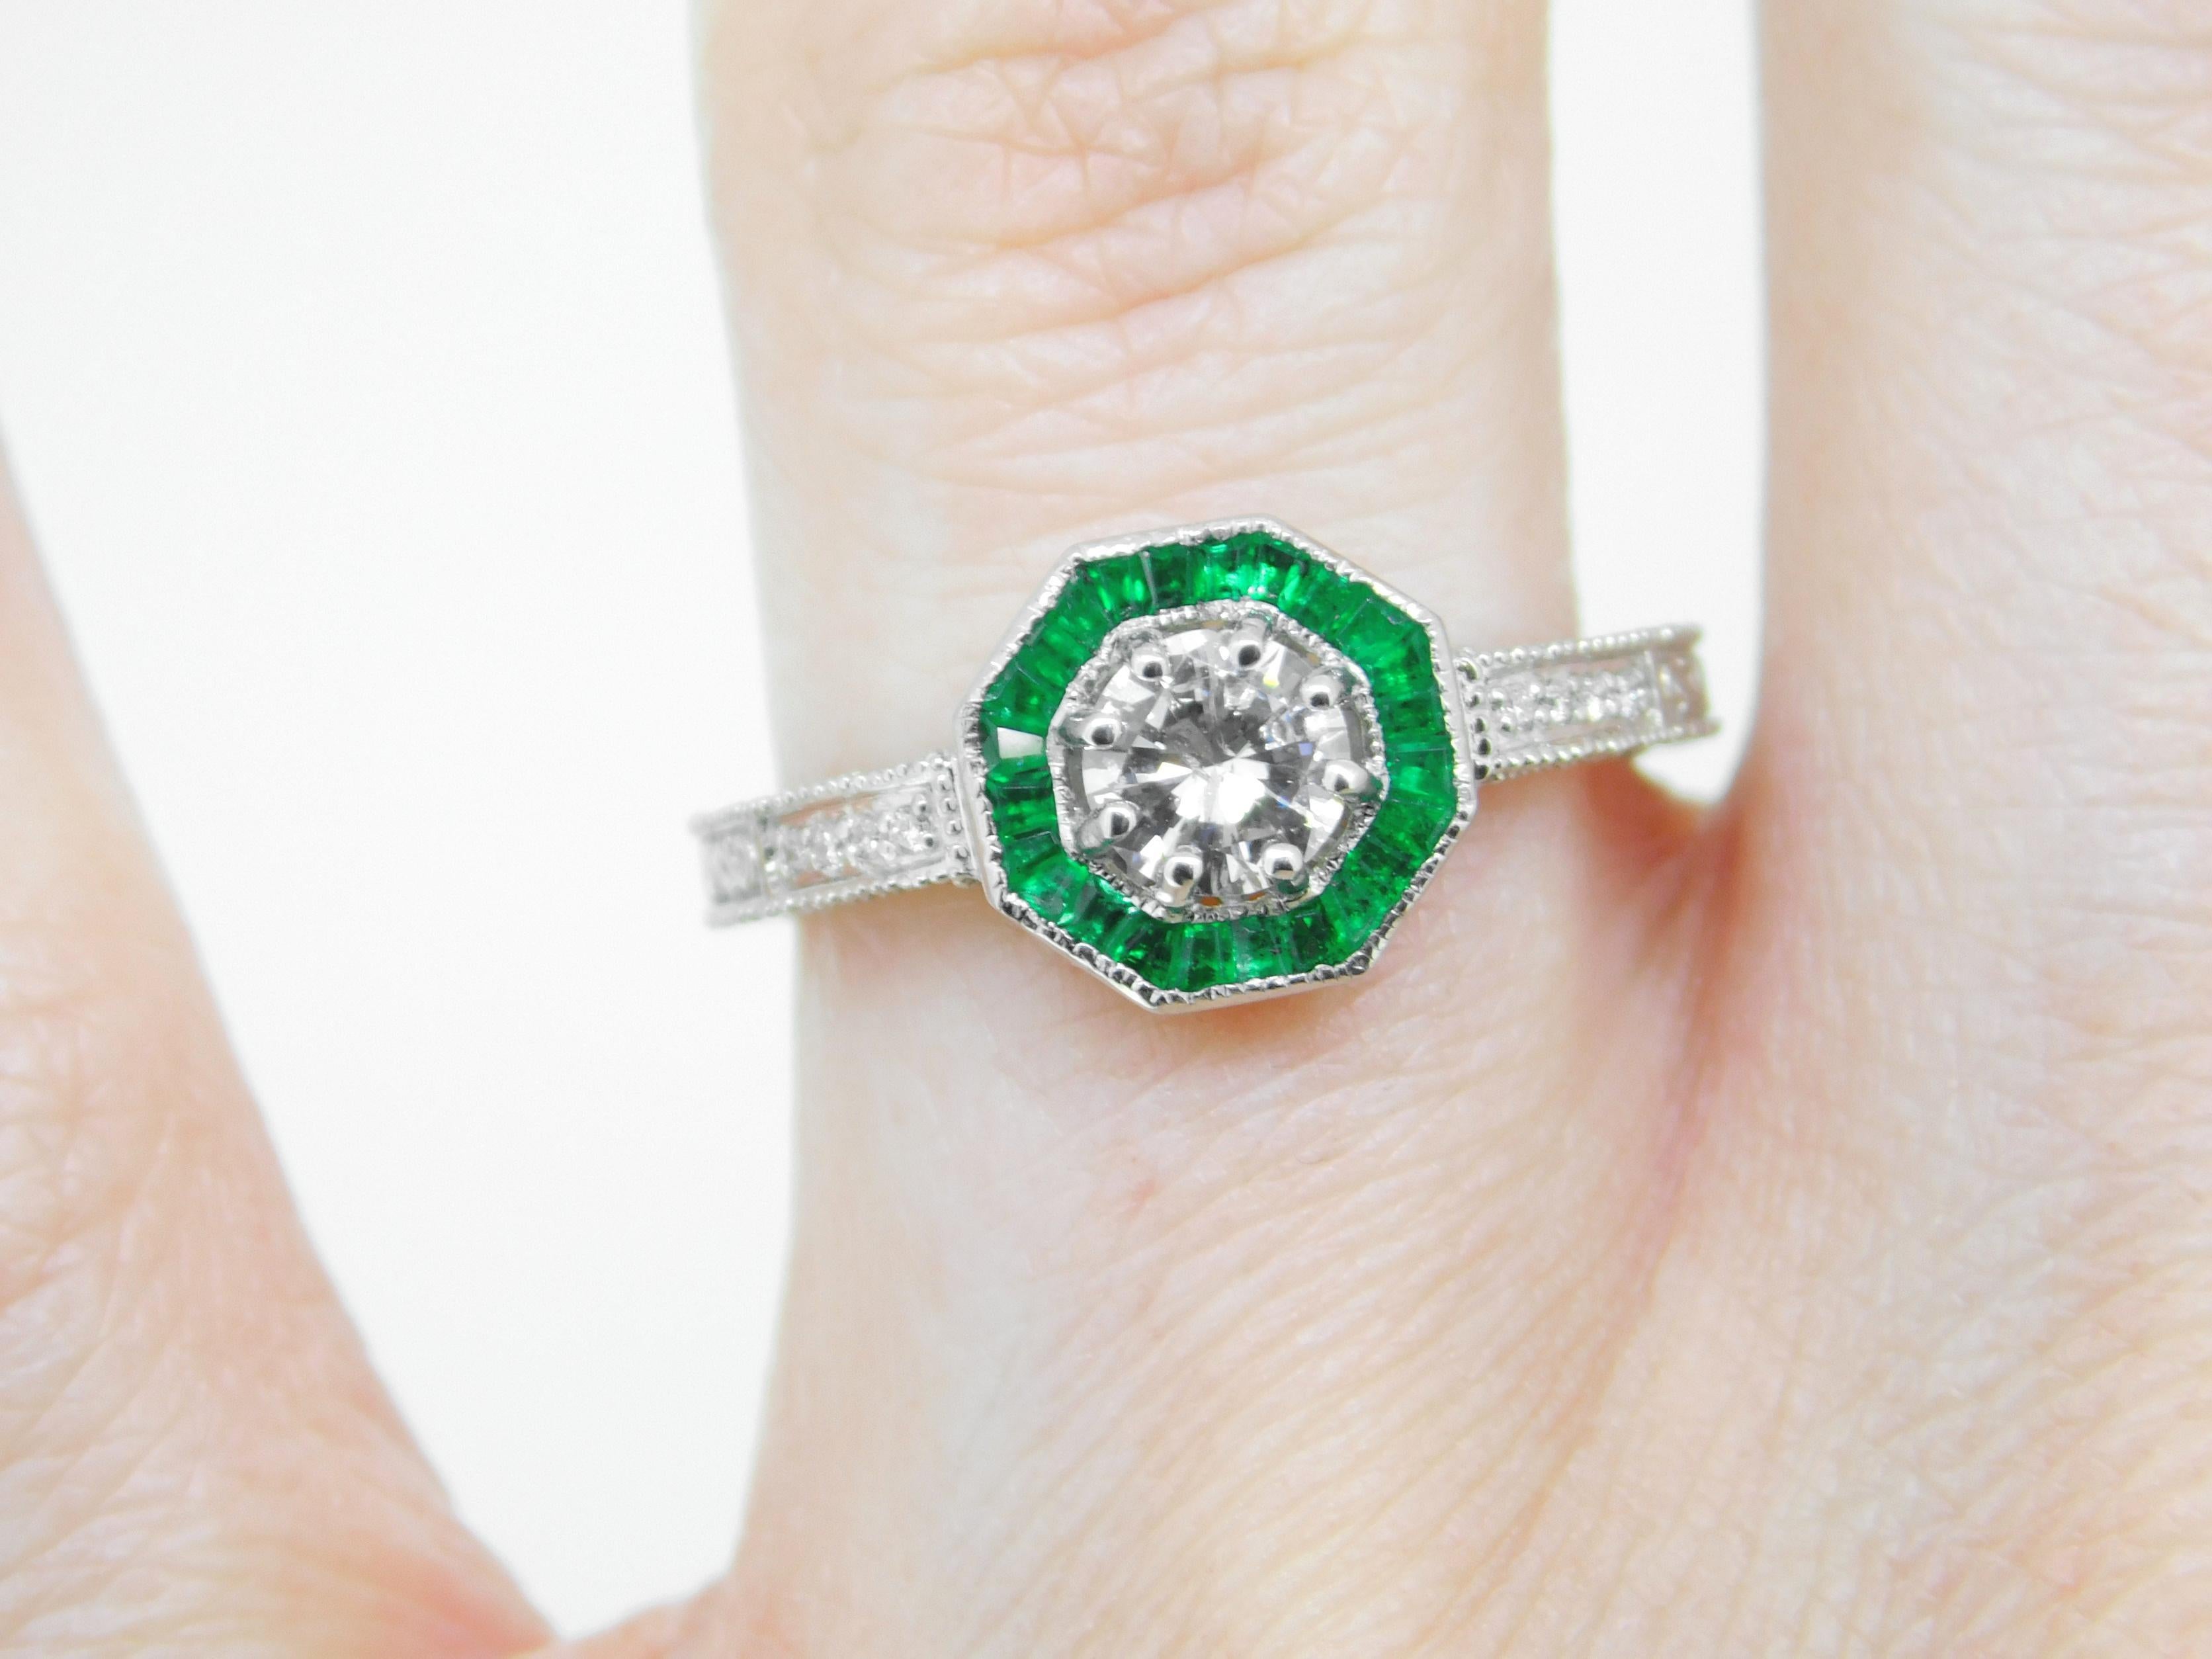 Women's 14k White Gold Genuine Natural Diamond Ring with Emerald Halo '#J5058'